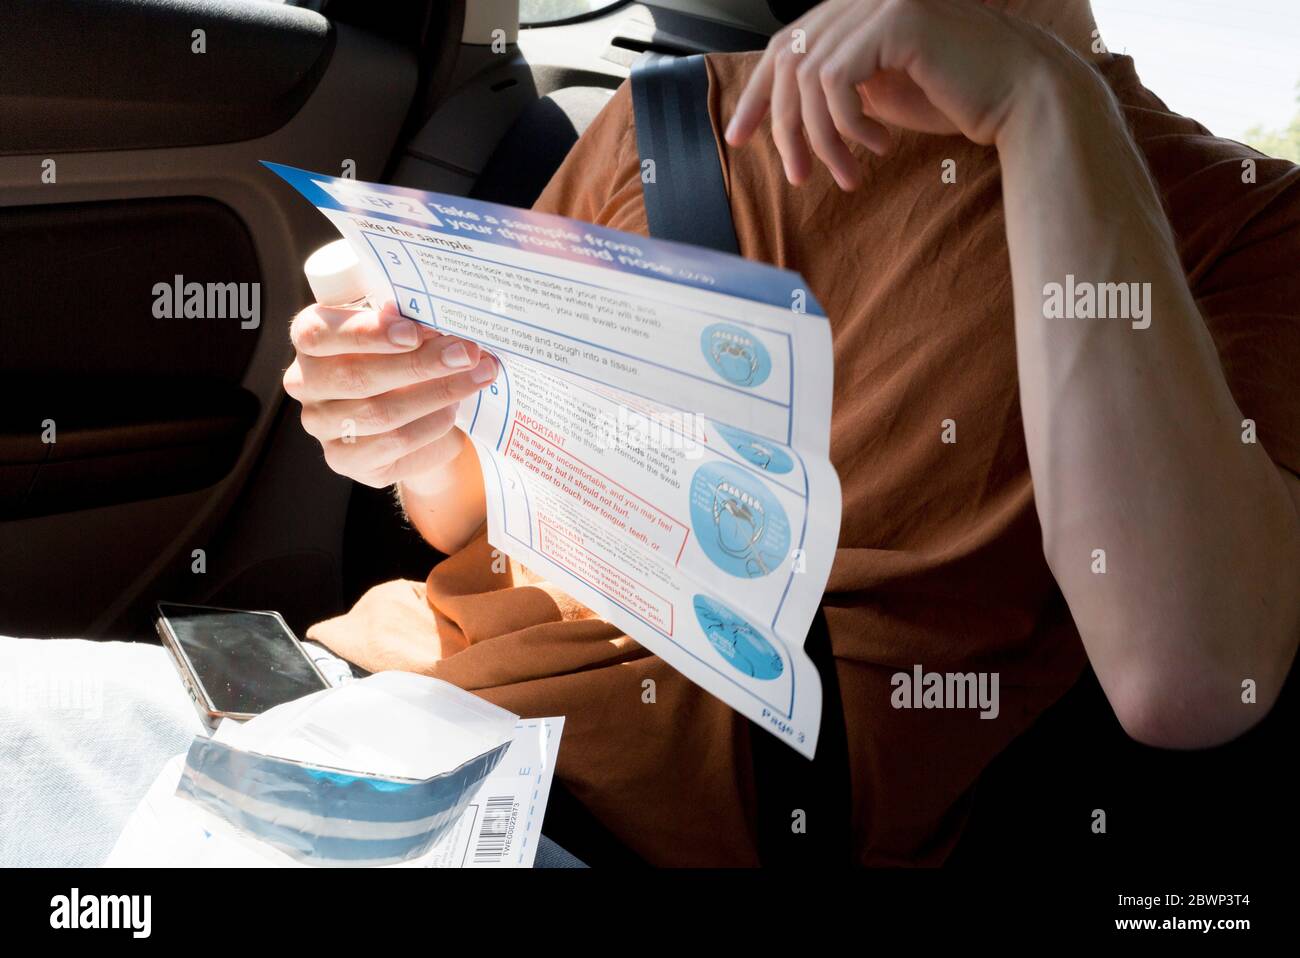 A young man in his twenties reads printed instructions after inserting a swab into his mouth to reach his tonsils and into his nasal passage from the rear seat of a car for a self-administered Coronavirus (COVID-19) test in south London. There are four steps to the self-administered Covid-19 test (inserting a swab into the nose and throat) which the public works through in their car, windows up and all communications with army personnel via phone, in a south London leisure centre, on 2nd June 2020, in London, England. The kit provided consists of a booklet, plastic bag, swab, vial, bar codes a Stock Photo